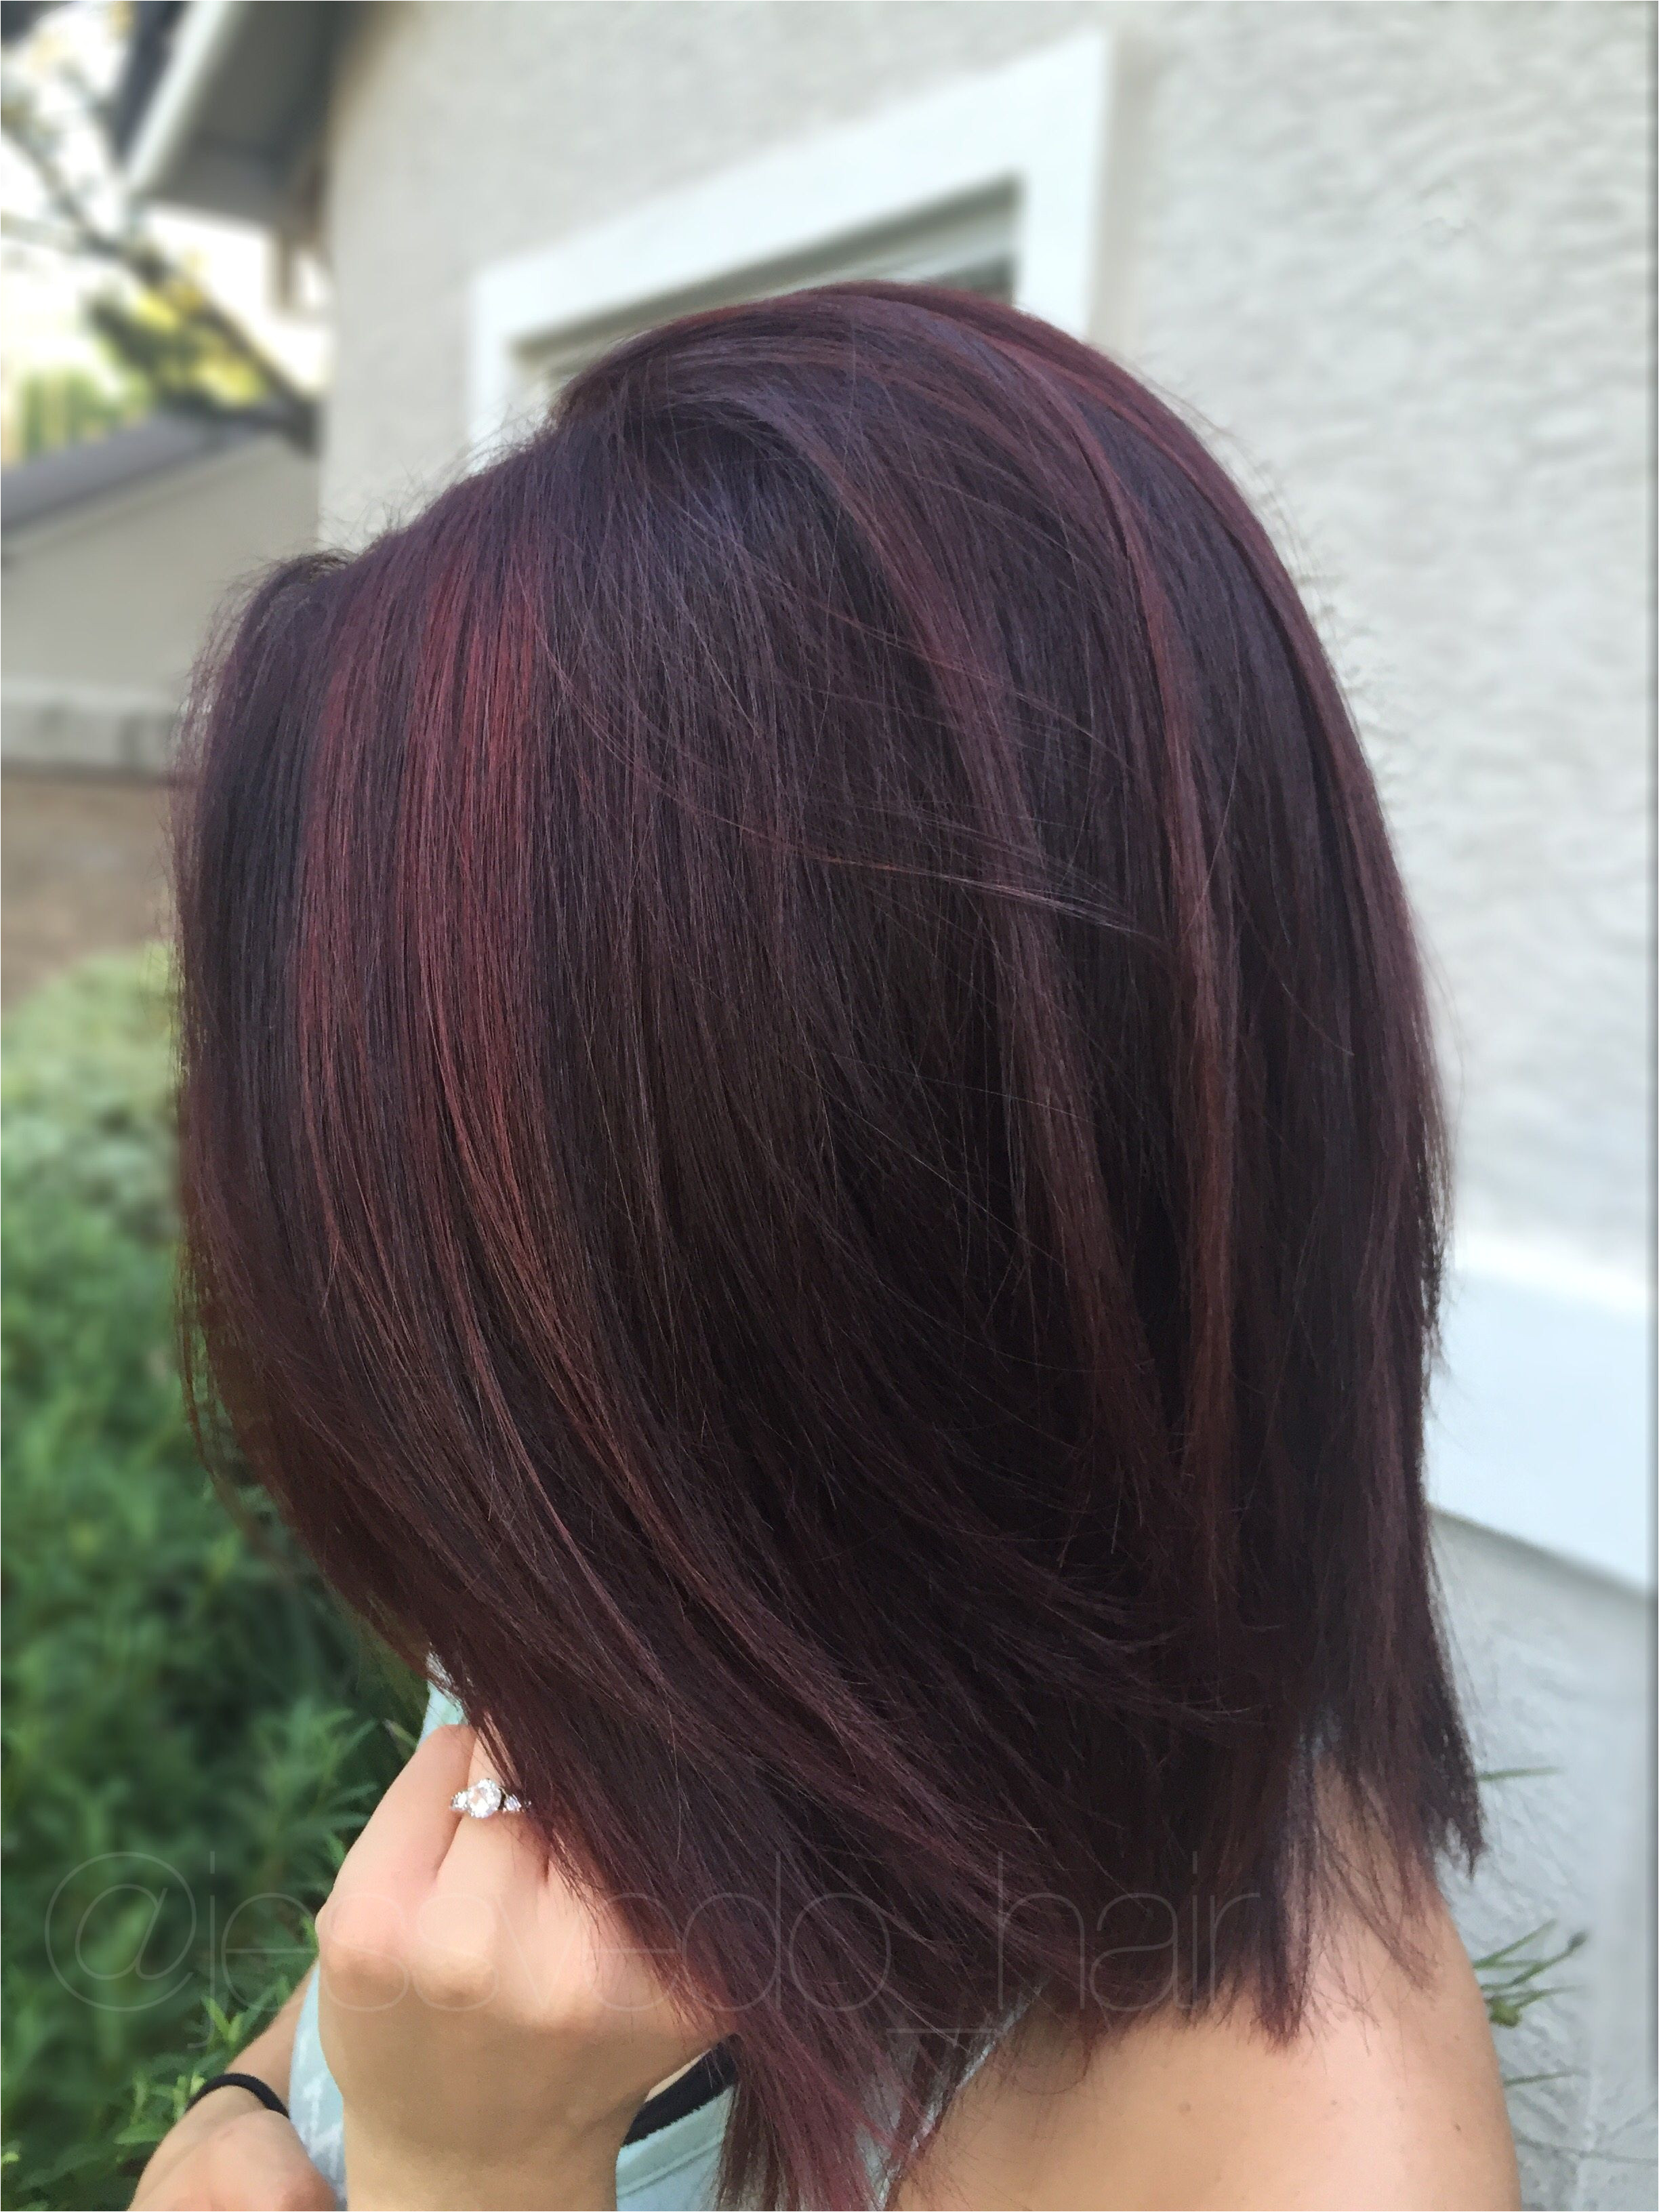 Red violet hair color with some red balayage highlights on short hair Just in time for fall and winter FORMULA on my IG jessvedo hair